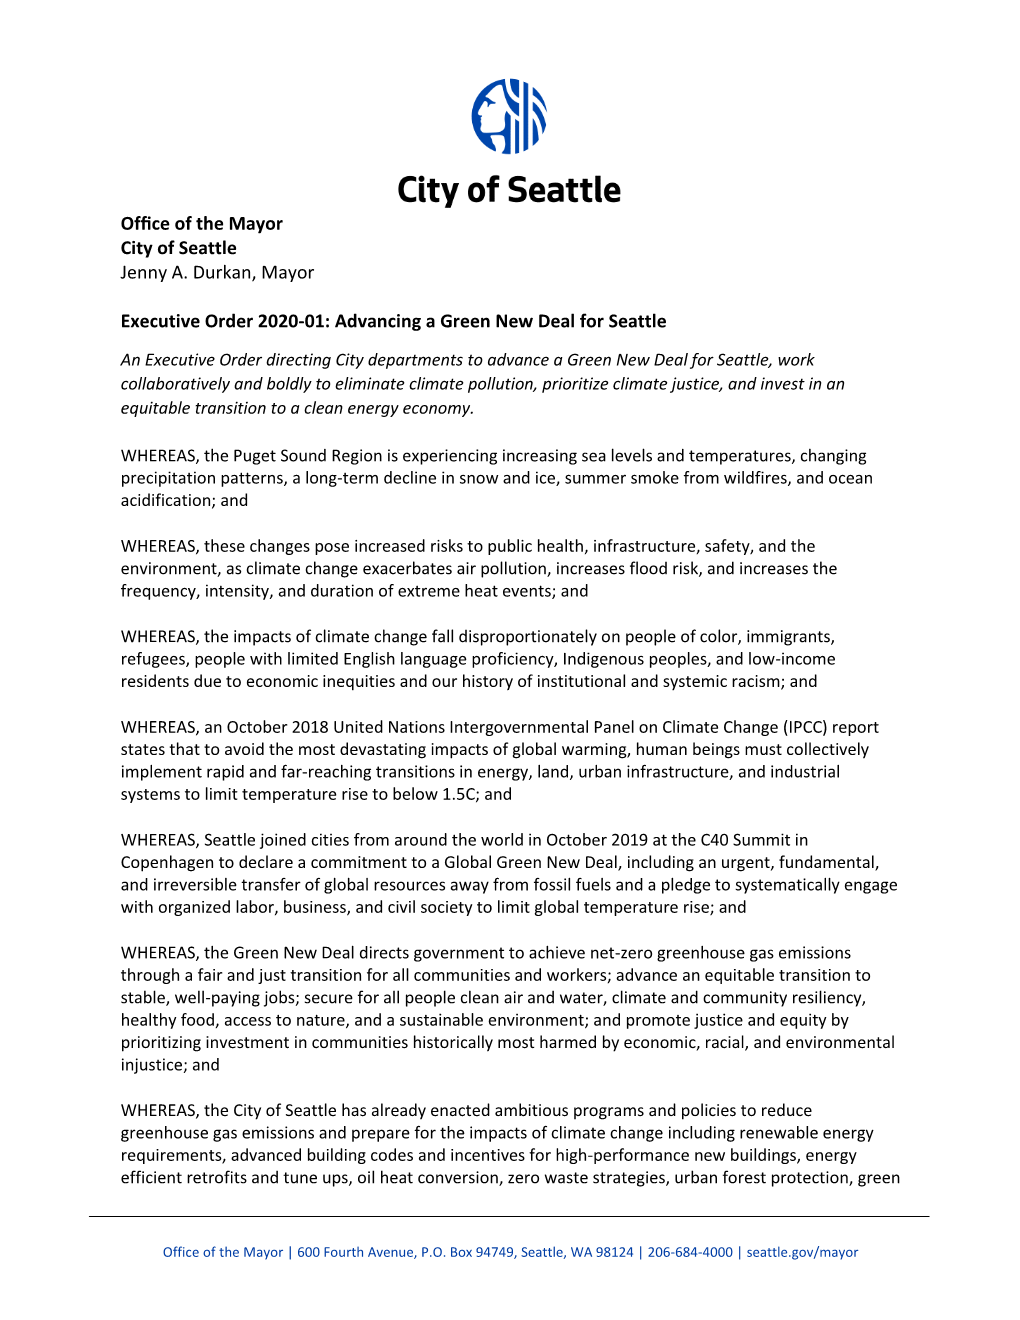 Executive Order 2020-01: Advancing a Green New Deal for Seattle